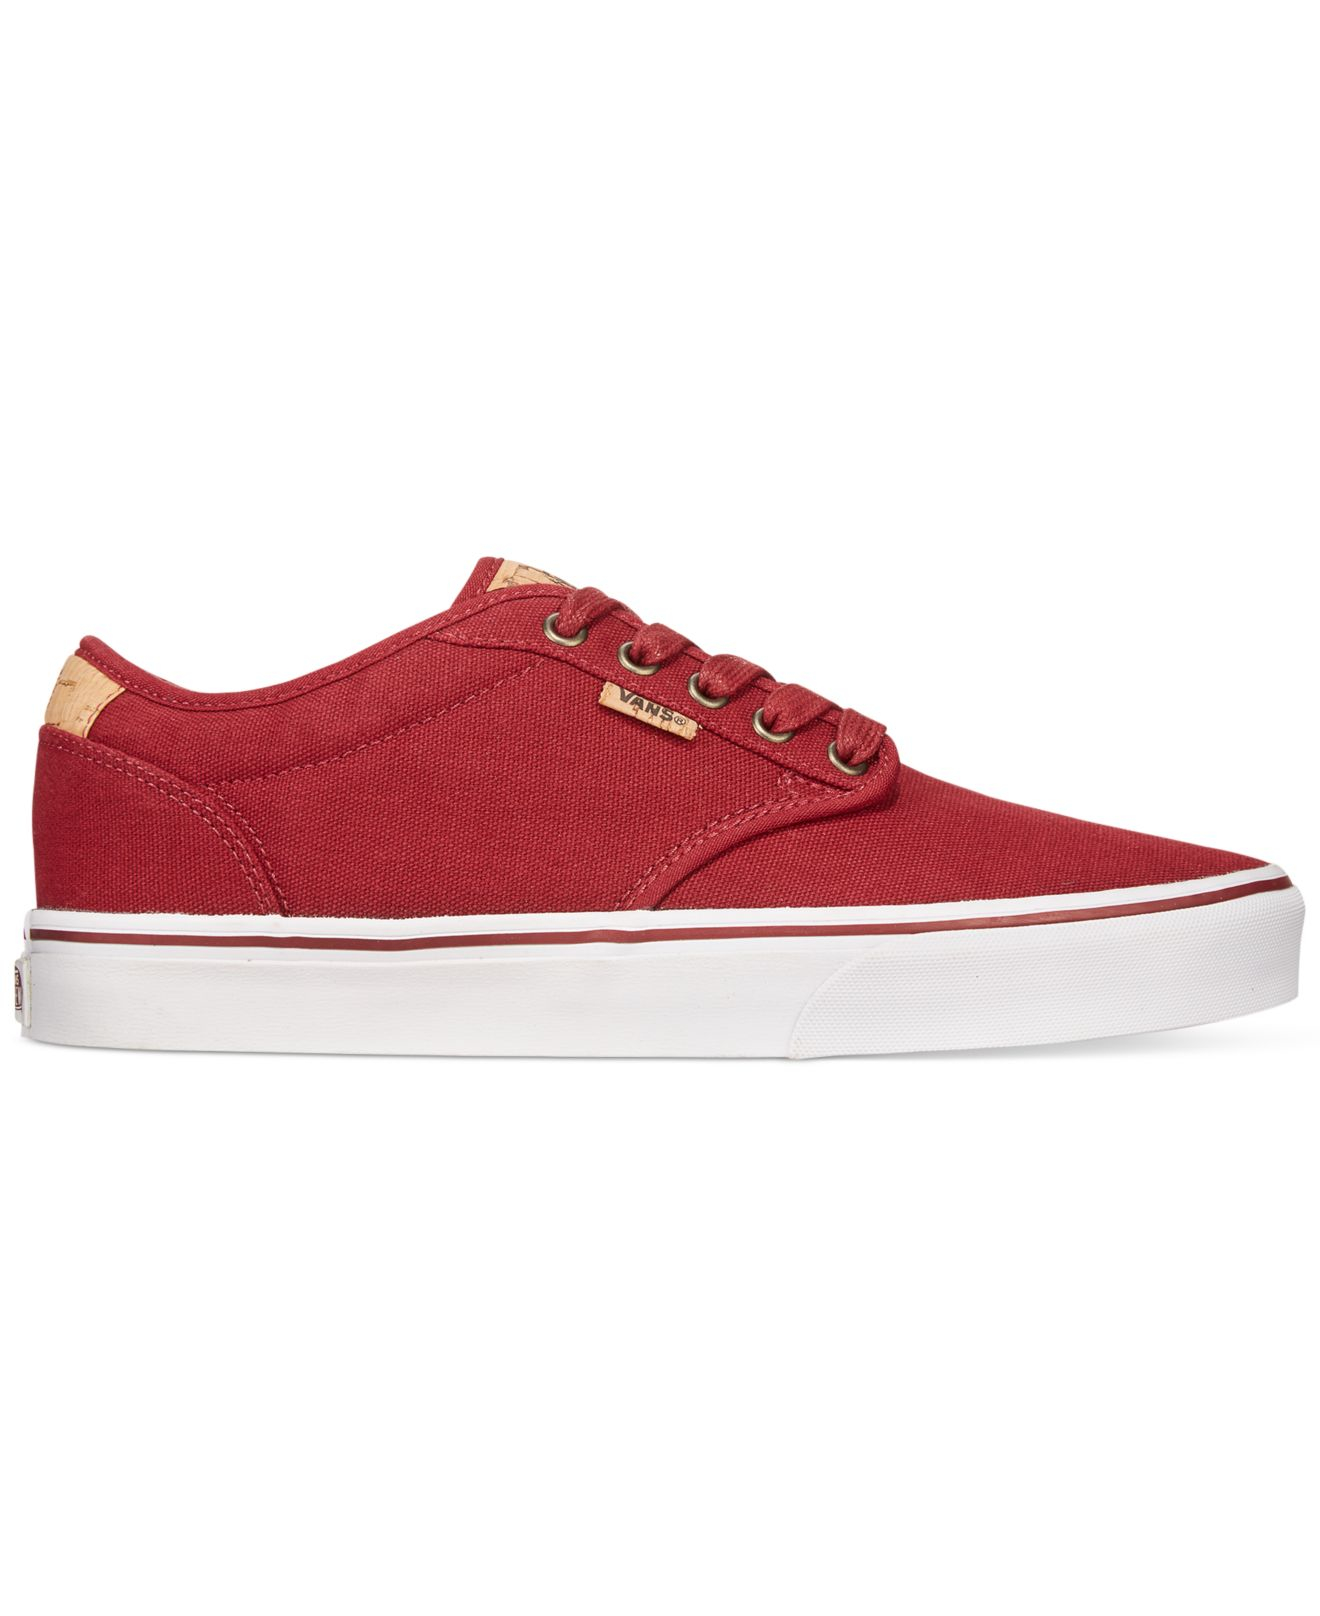 red vans atwood